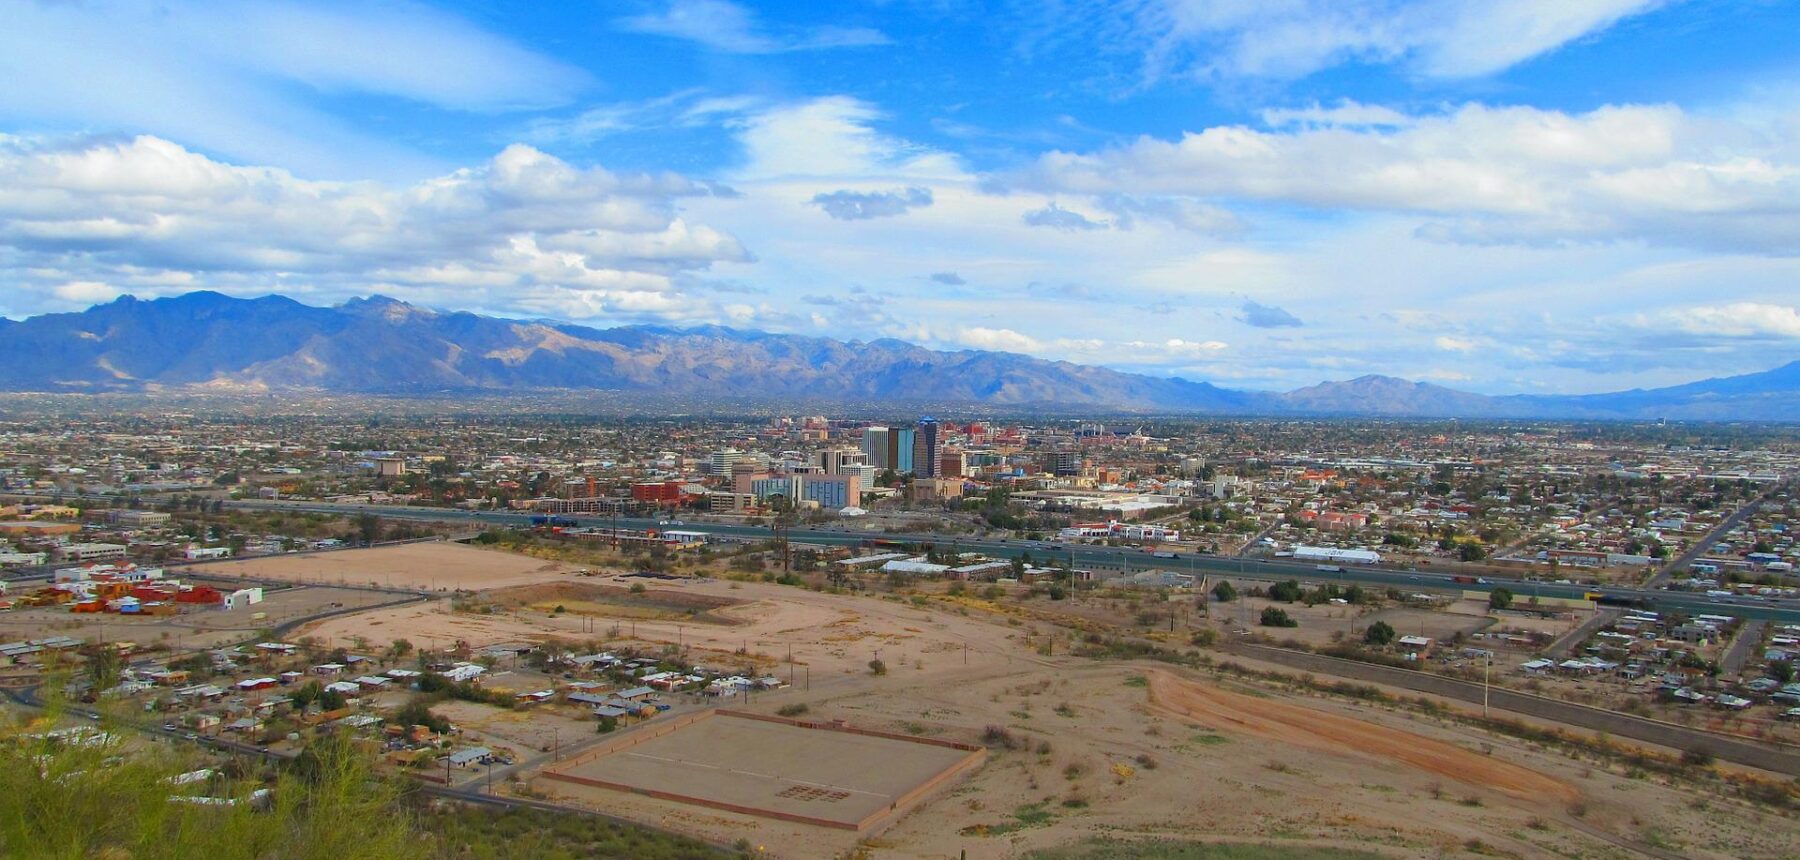 Strippers Tucson, aerial view of the bachelor party hub in AZ